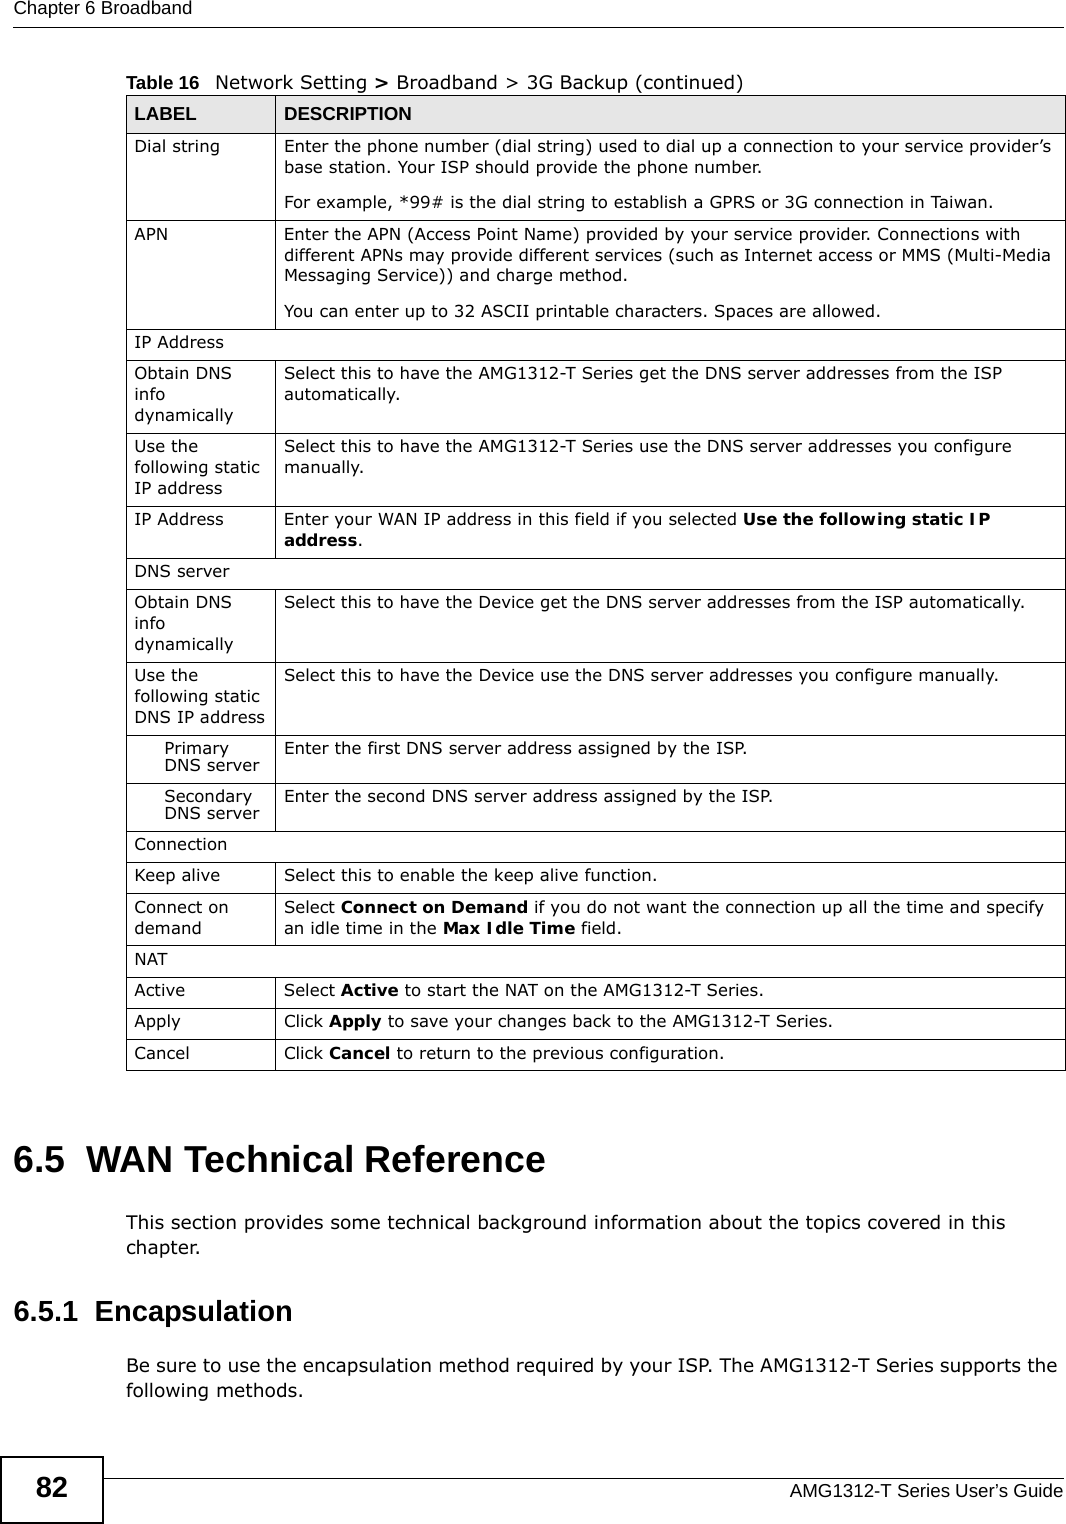 Chapter 6 BroadbandAMG1312-T Series User’s Guide826.5  WAN Technical ReferenceThis section provides some technical background information about the topics covered in this chapter.6.5.1  EncapsulationBe sure to use the encapsulation method required by your ISP. The AMG1312-T Series supports the following methods.Dial string Enter the phone number (dial string) used to dial up a connection to your service provider’s base station. Your ISP should provide the phone number.For example, *99# is the dial string to establish a GPRS or 3G connection in Taiwan.APN Enter the APN (Access Point Name) provided by your service provider. Connections with different APNs may provide different services (such as Internet access or MMS (Multi-Media Messaging Service)) and charge method.You can enter up to 32 ASCII printable characters. Spaces are allowed.IP AddressObtain DNS info dynamically Select this to have the AMG1312-T Series get the DNS server addresses from the ISP automatically. Use the following static IP addressSelect this to have the AMG1312-T Series use the DNS server addresses you configure manually.IP Address Enter your WAN IP address in this field if you selected Use the following static IP address. DNS serverObtain DNS info dynamicallySelect this to have the Device get the DNS server addresses from the ISP automatically.Use the following static DNS IP addressSelect this to have the Device use the DNS server addresses you configure manually.Primary DNS server Enter the first DNS server address assigned by the ISP.Secondary DNS server Enter the second DNS server address assigned by the ISP.ConnectionKeep alive Select this to enable the keep alive function.Connect on demandSelect Connect on Demand if you do not want the connection up all the time and specify an idle time in the Max Idle Time field.NATActive Select Active to start the NAT on the AMG1312-T Series.Apply Click Apply to save your changes back to the AMG1312-T Series.Cancel Click Cancel to return to the previous configuration.Table 16   Network Setting &gt; Broadband &gt; 3G Backup (continued)LABEL DESCRIPTION